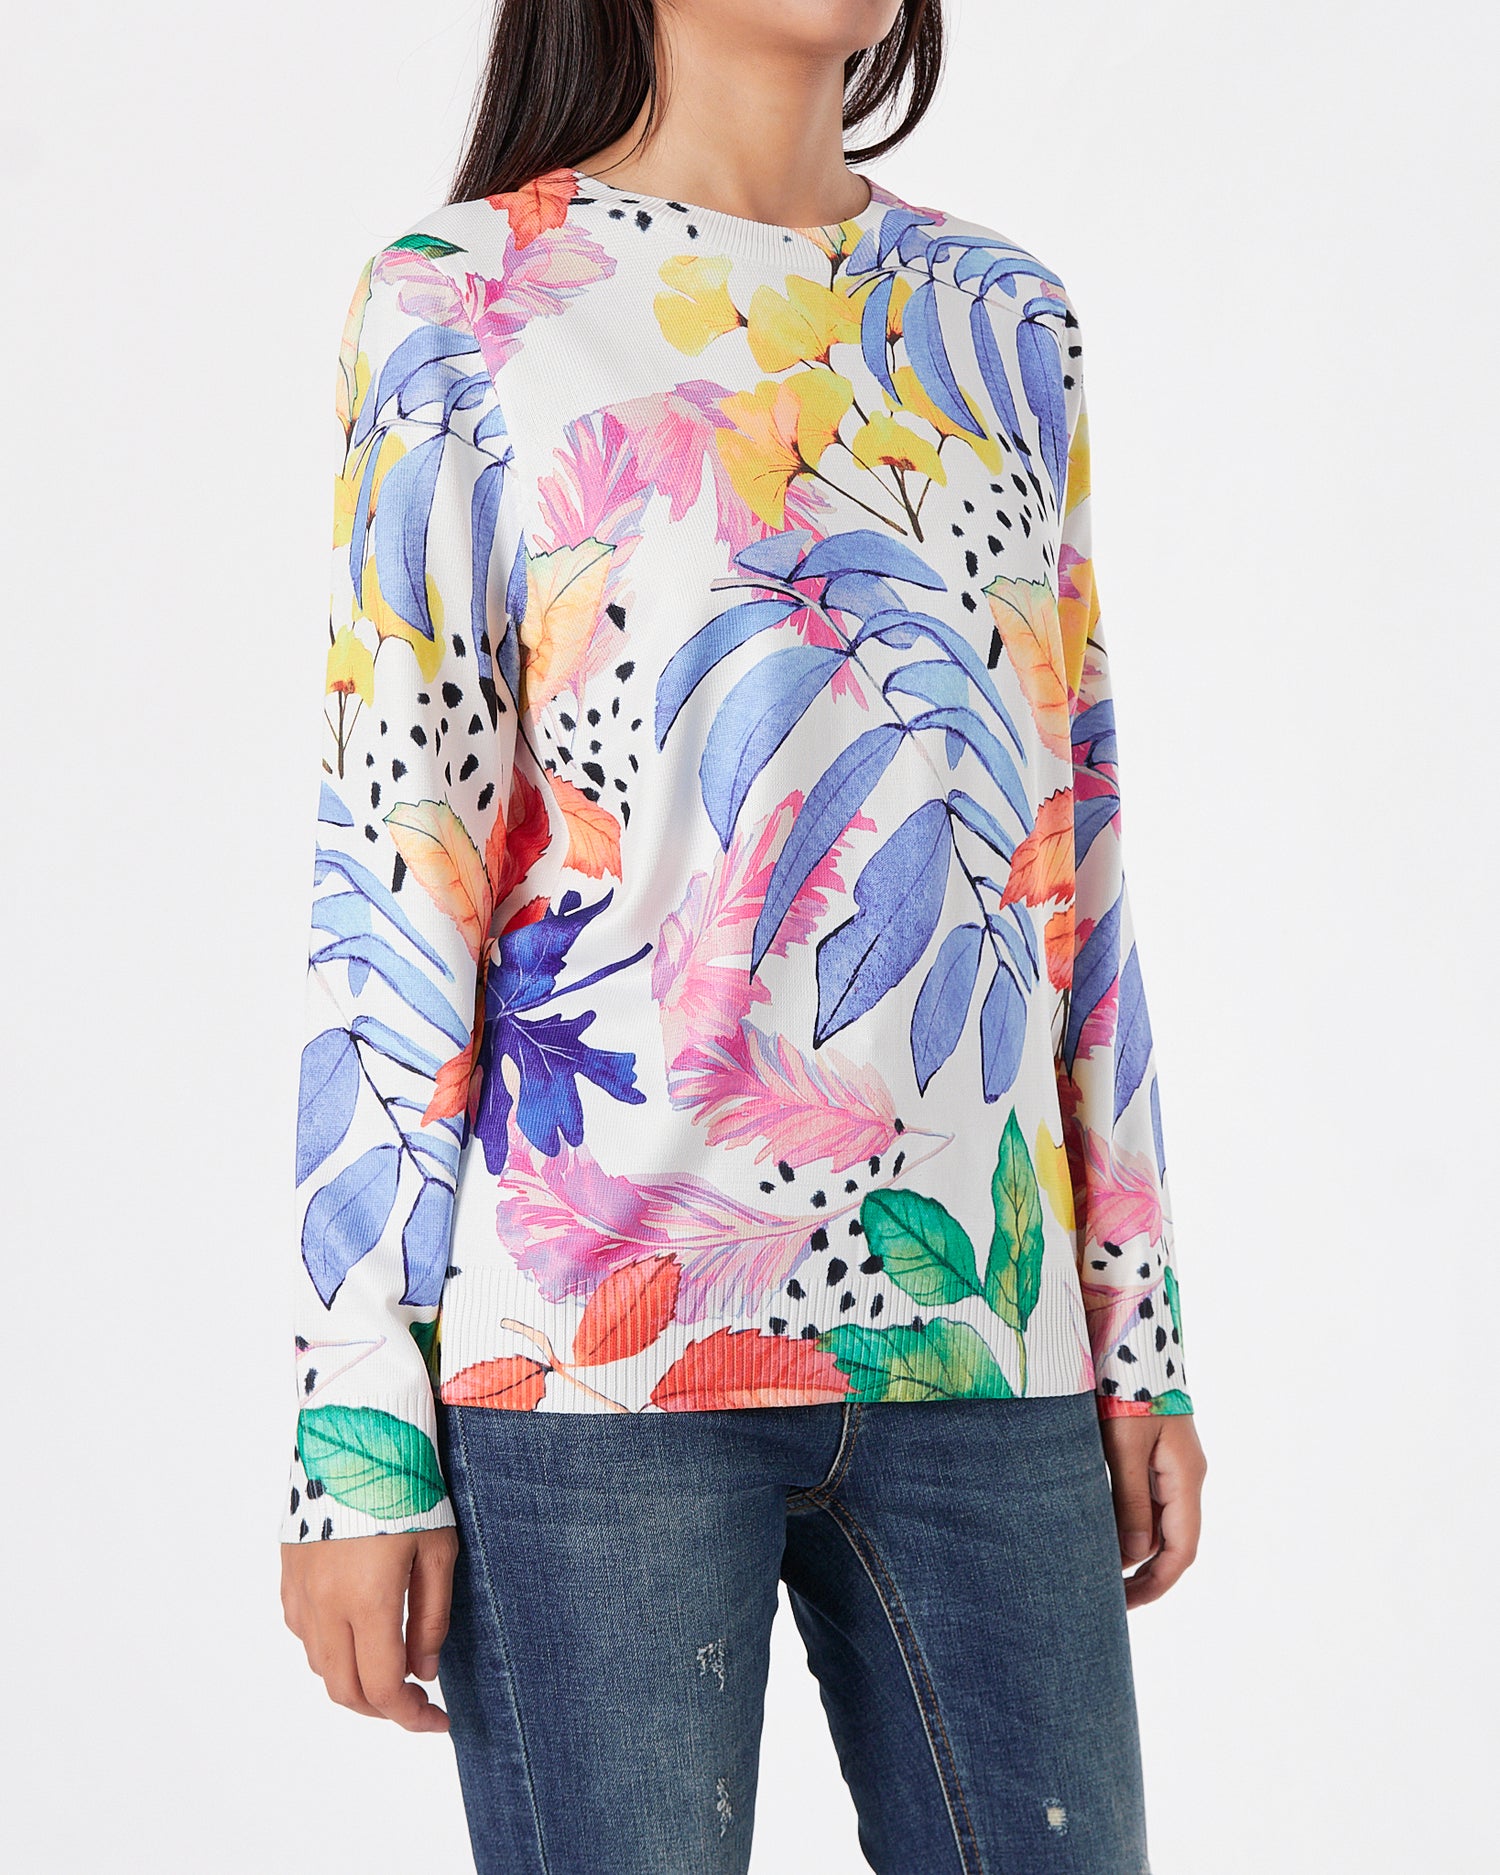 Floral Over Printed Lady  Sweater 22.90